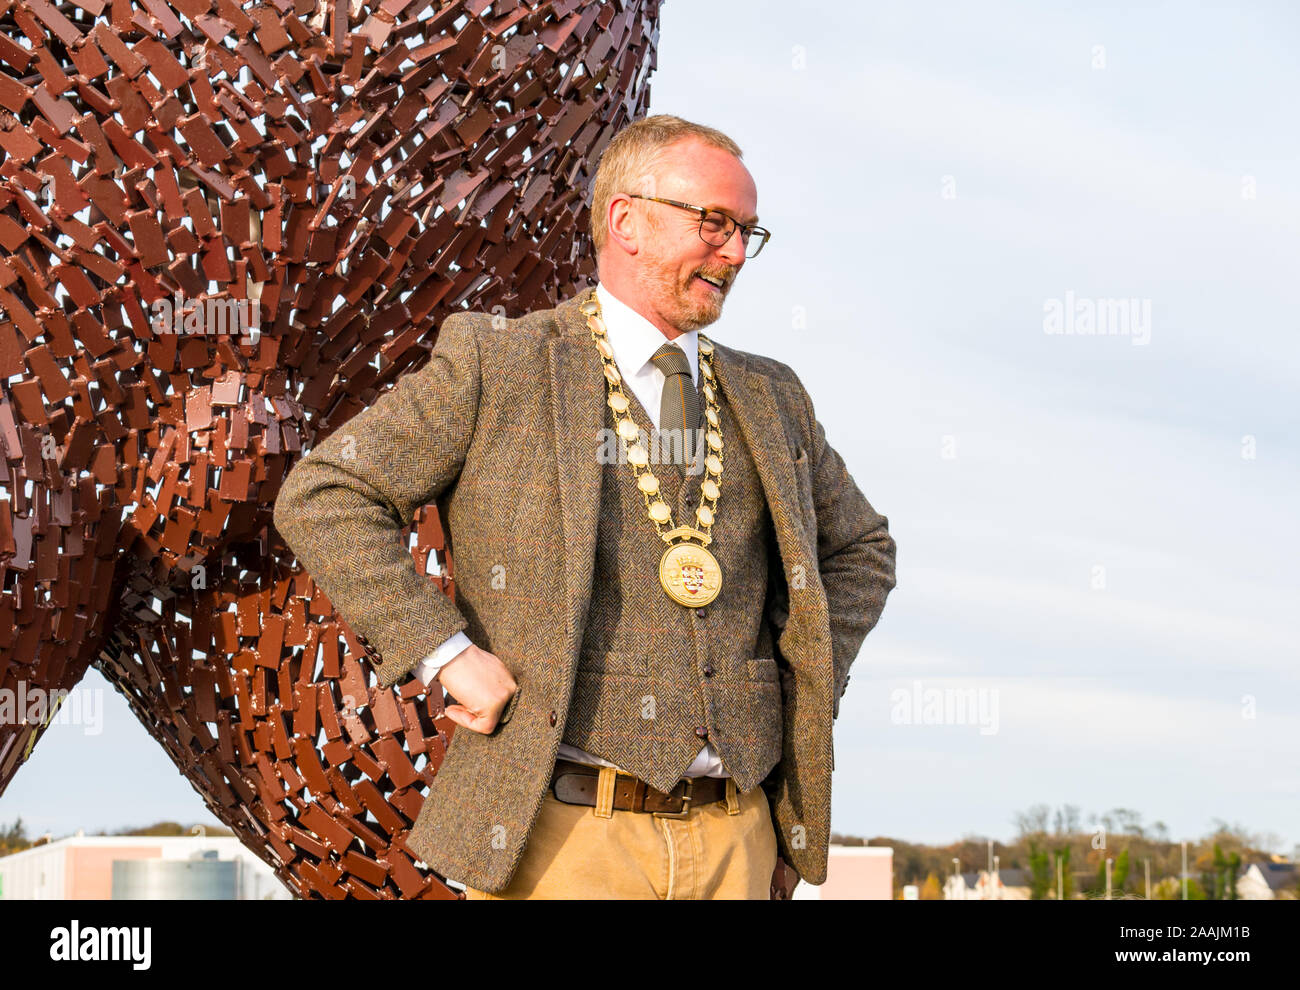 Unveiling of bear sculpture to celebrate life of John Muir by sculptor Andy Scott wearing Provost chain, Dunbar, East Lothian, Scotland, UK Stock Photo